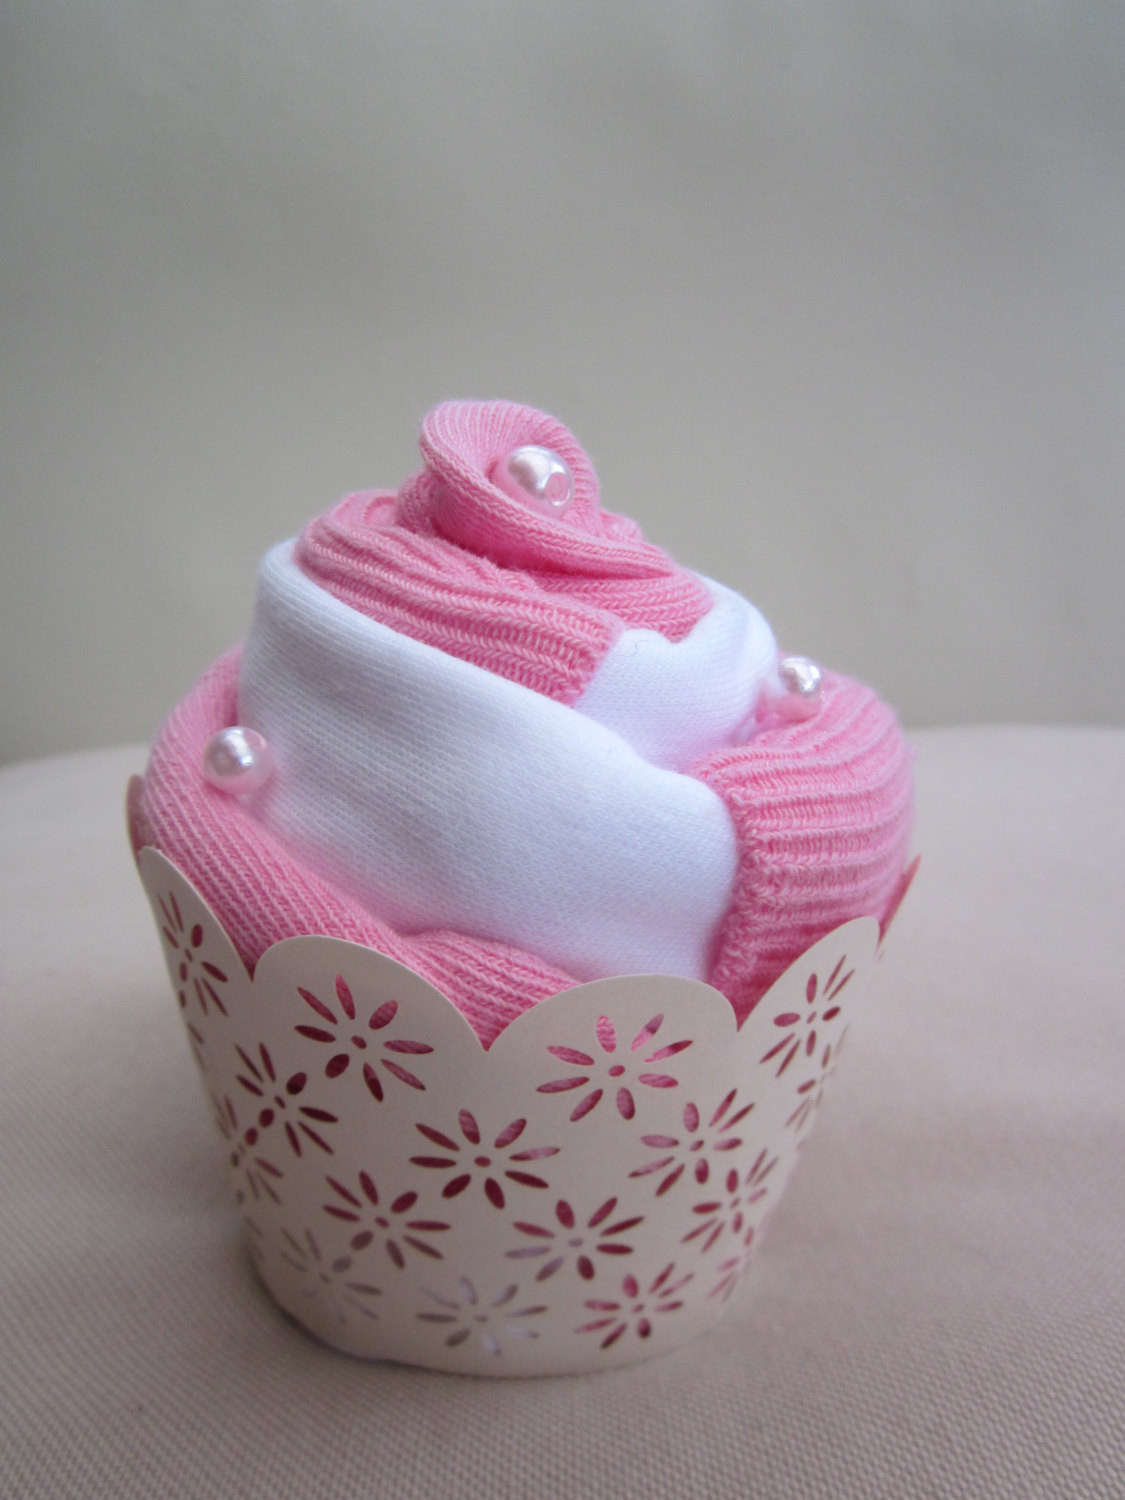 Baby Clothes Cupcakes
 Sweet baby cupcakes made from quality baby clothes Body suit